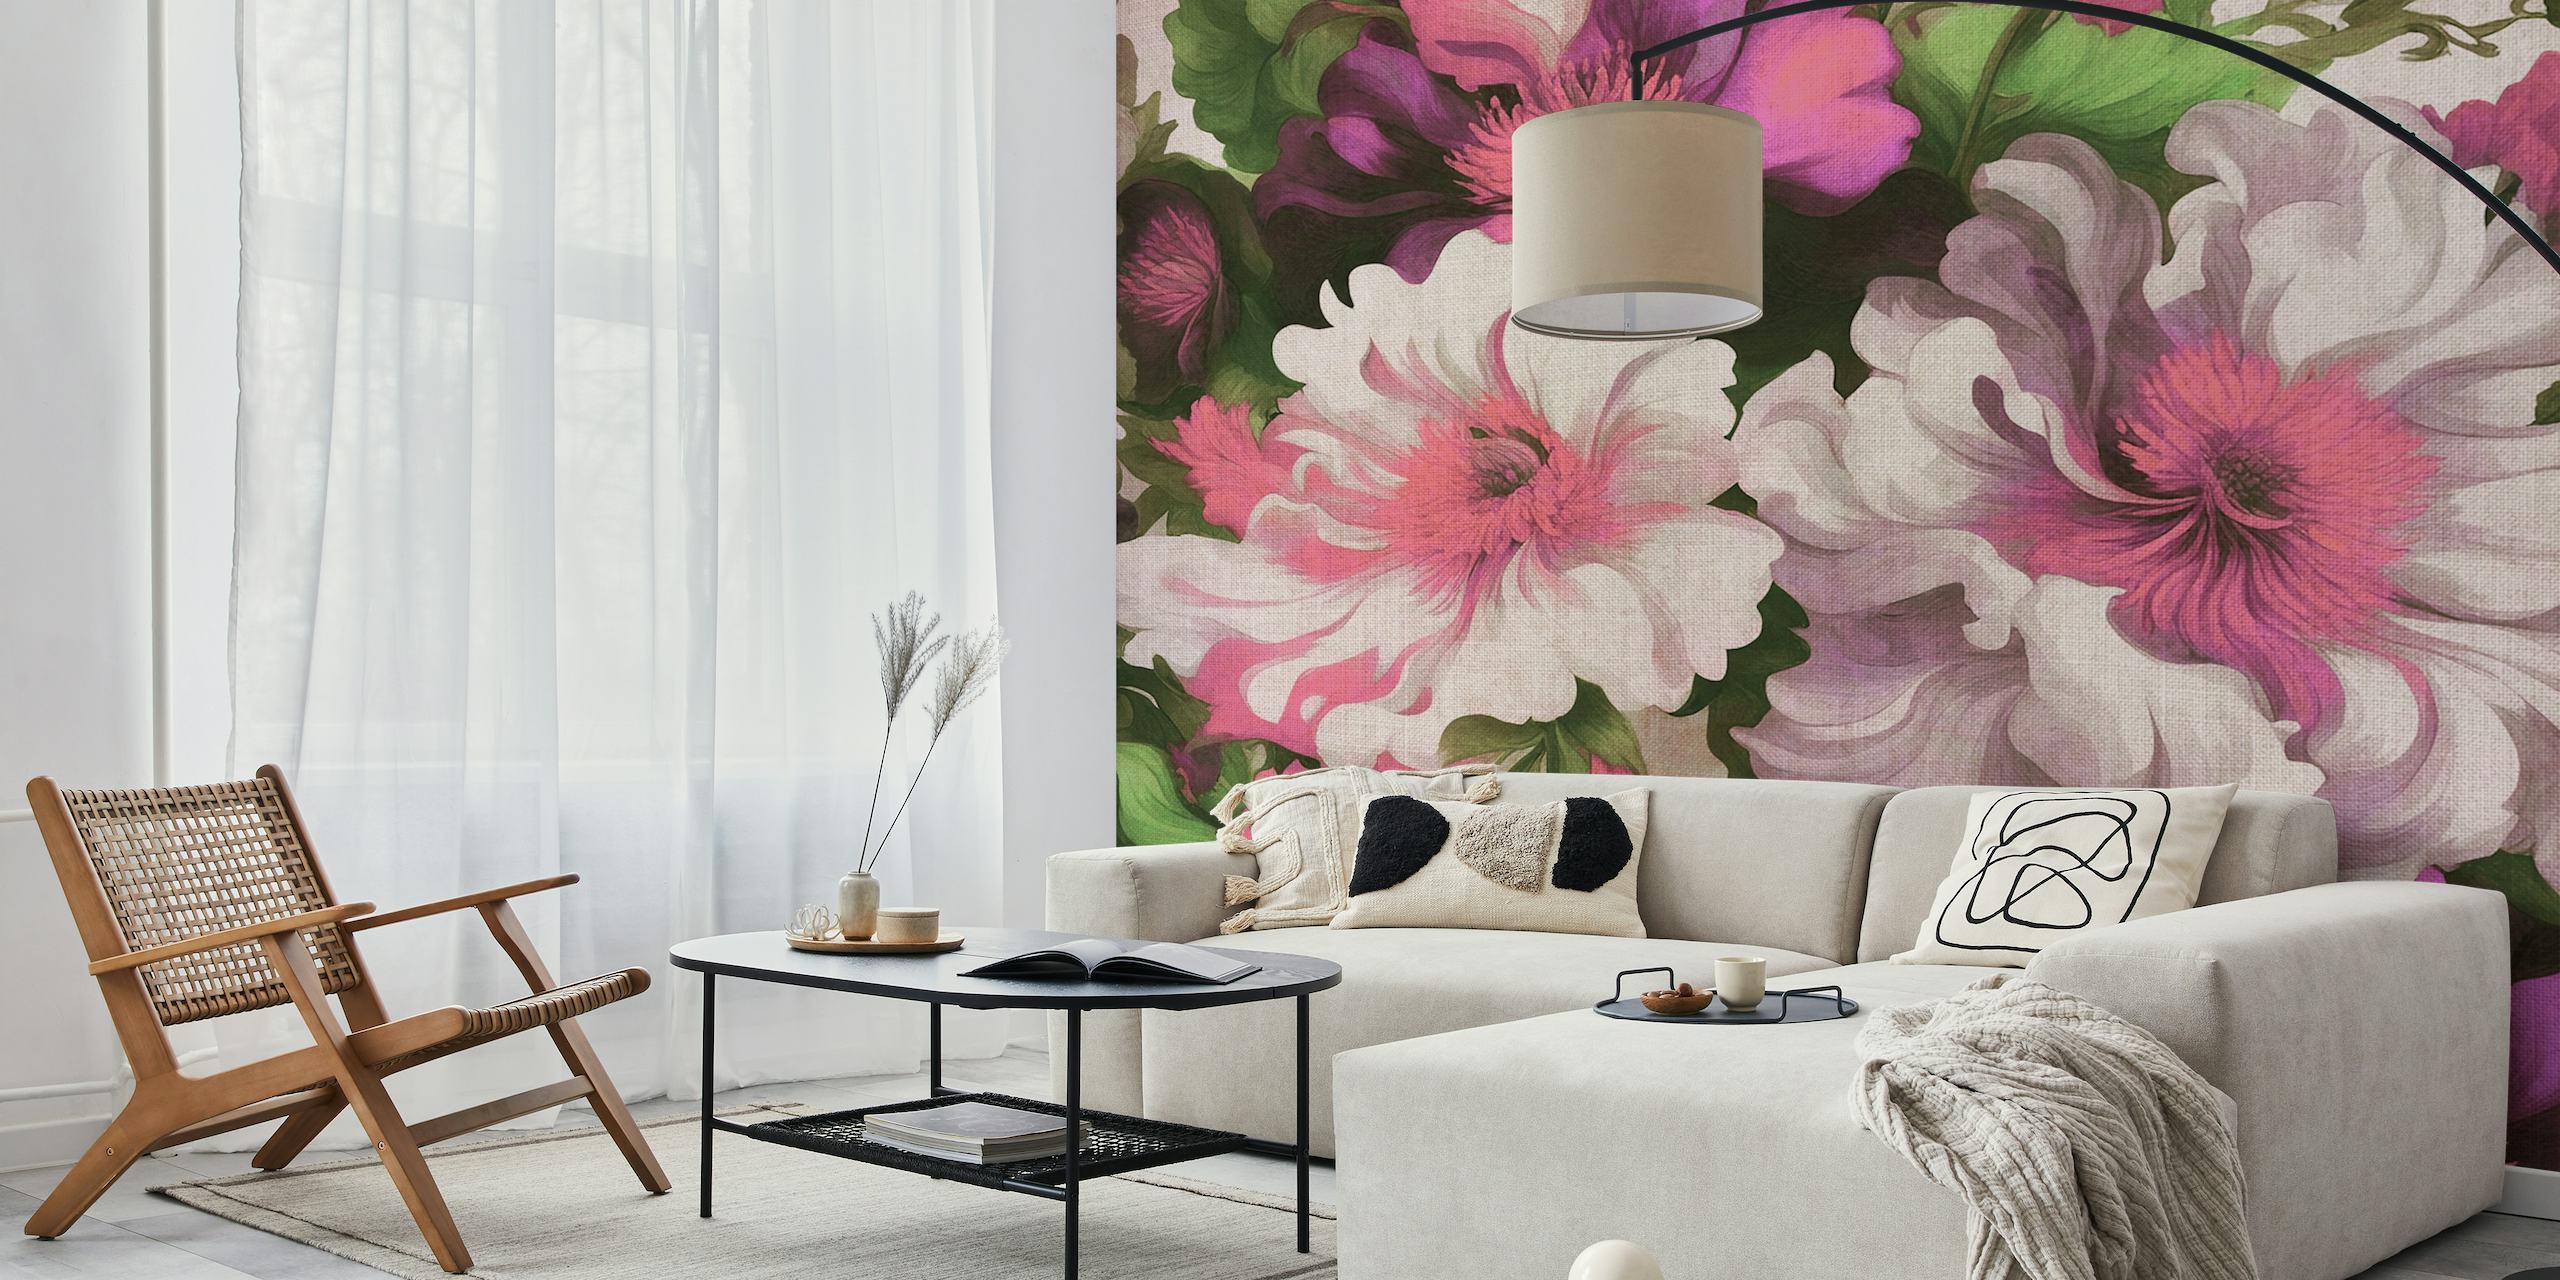 Elegant pink and white baroque floral wall mural